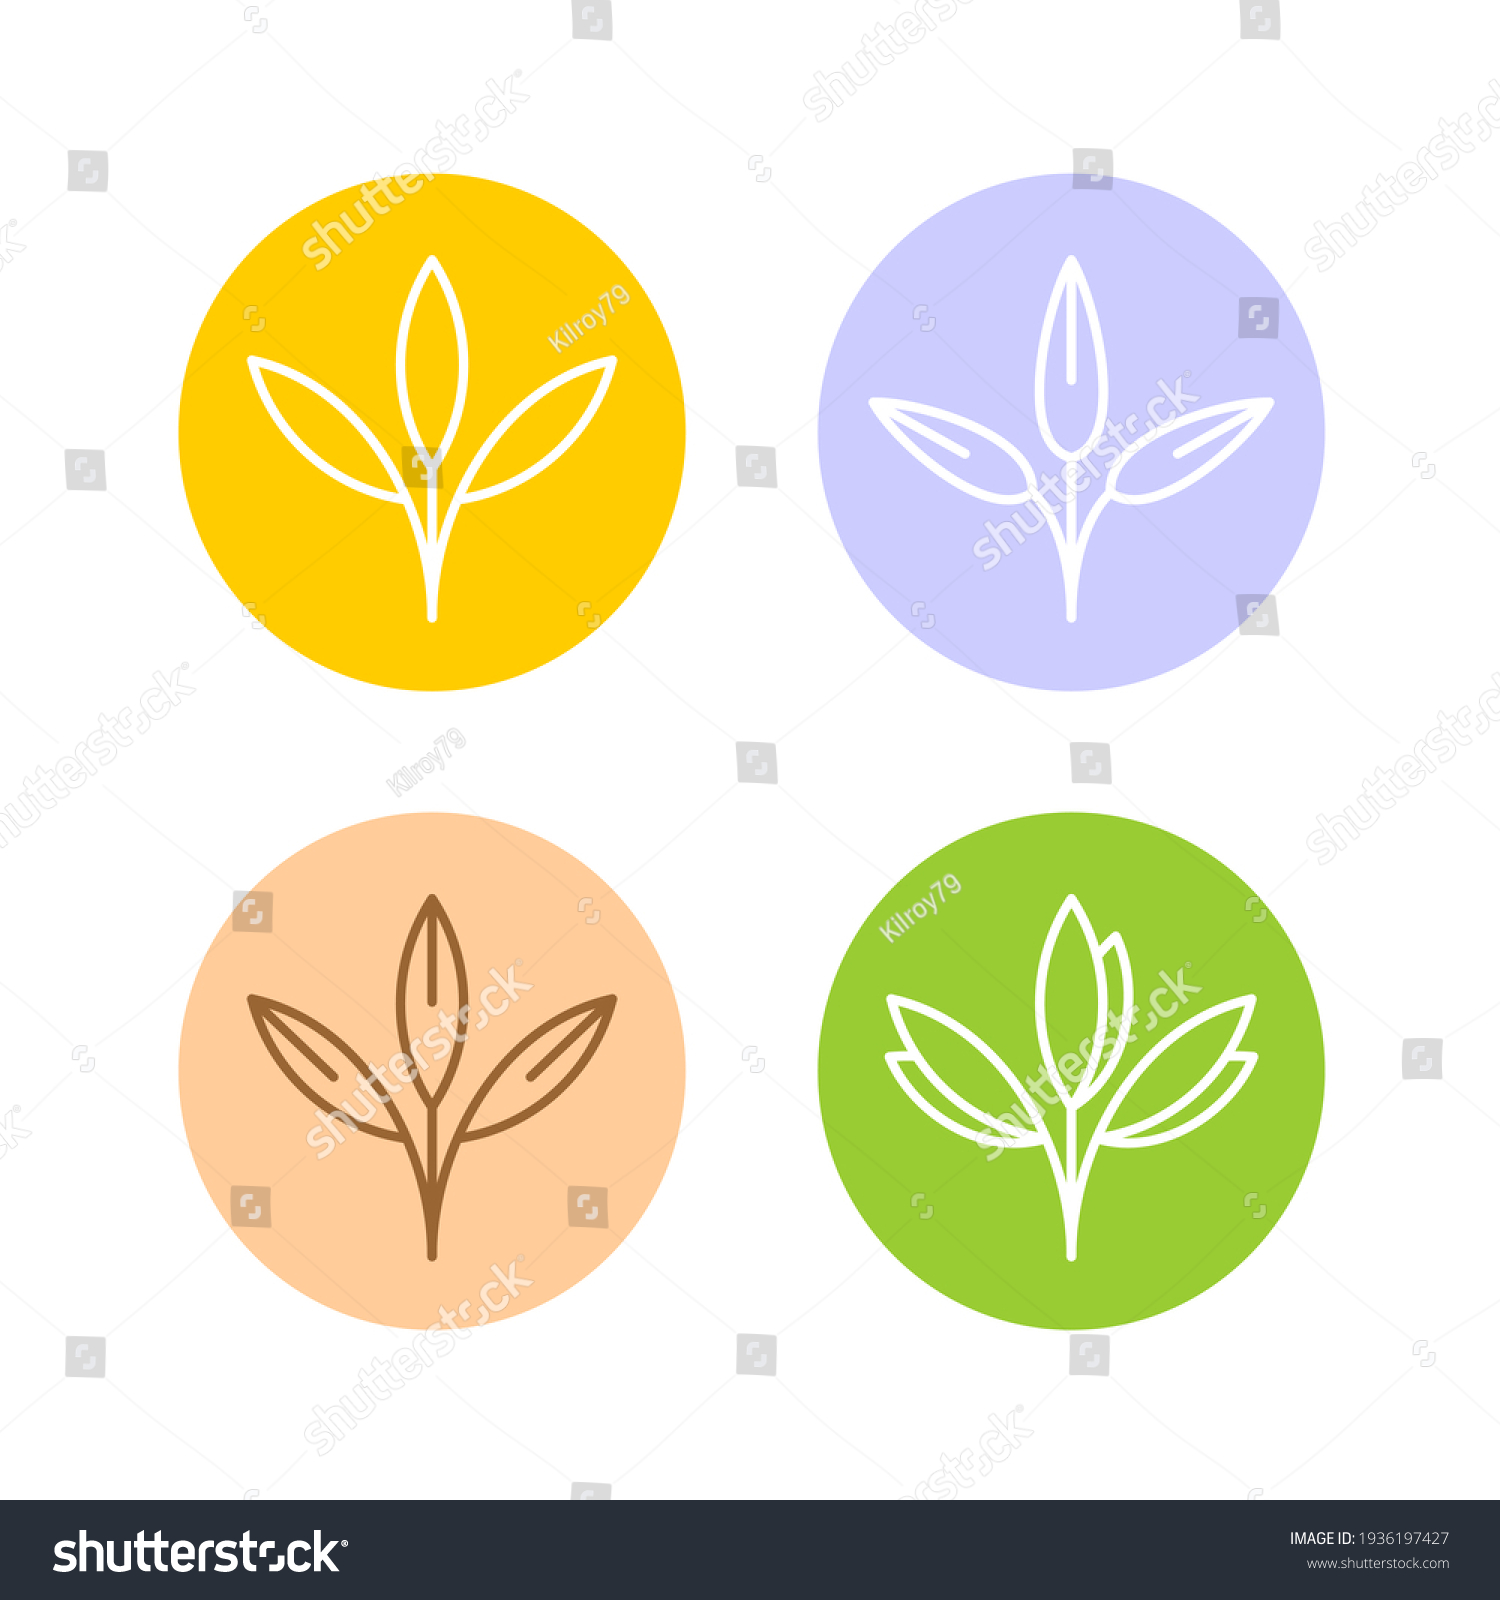 869 Leaves adjustment icon Images, Stock Photos & Vectors | Shutterstock